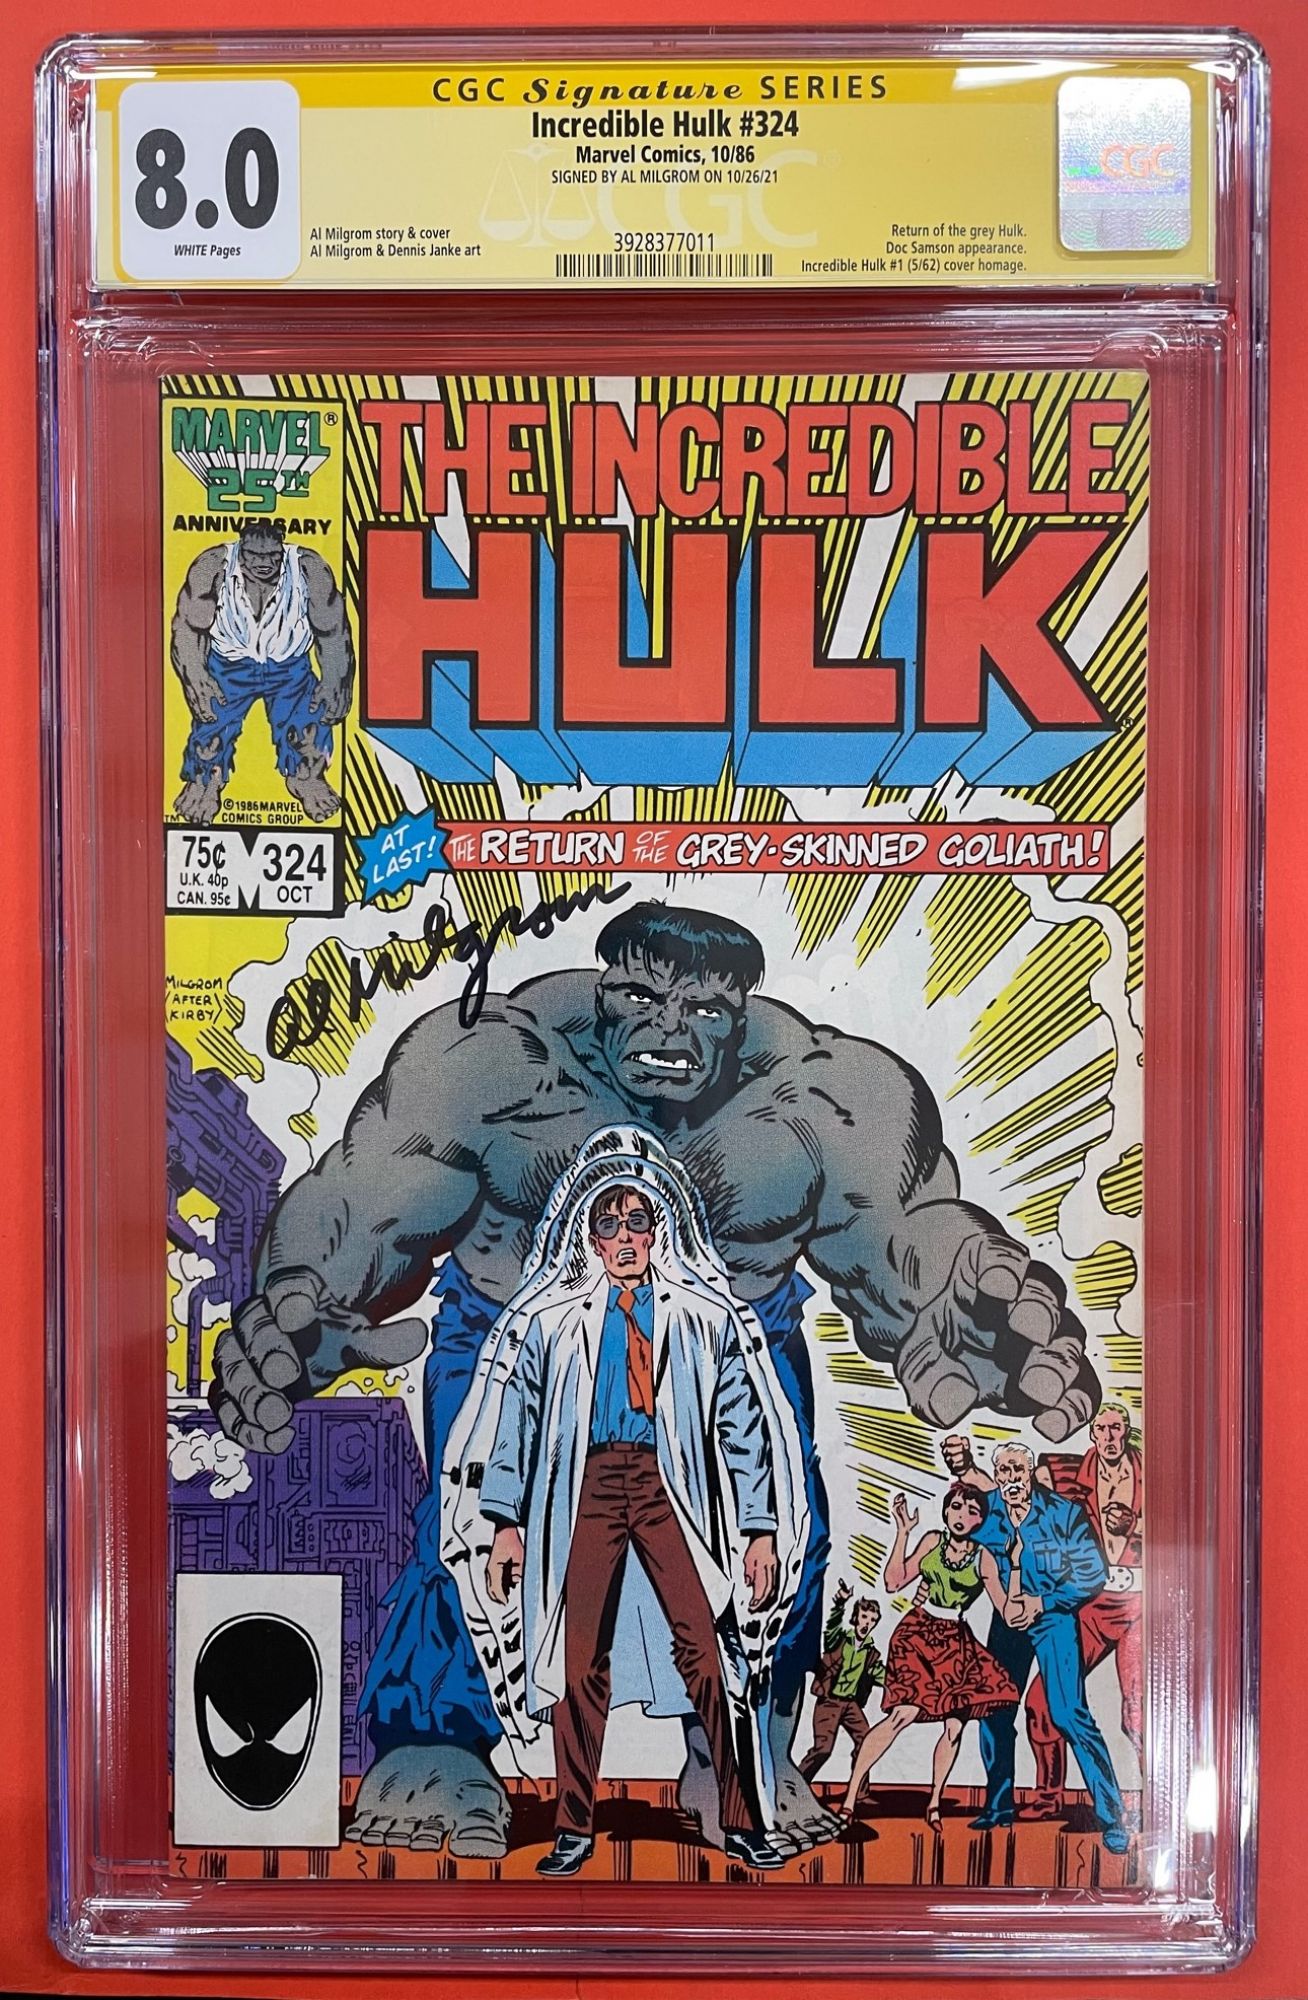 Incredible Hulk #324, Oct 1986, 8.0 VF, CGC Signed by Al Milgrom